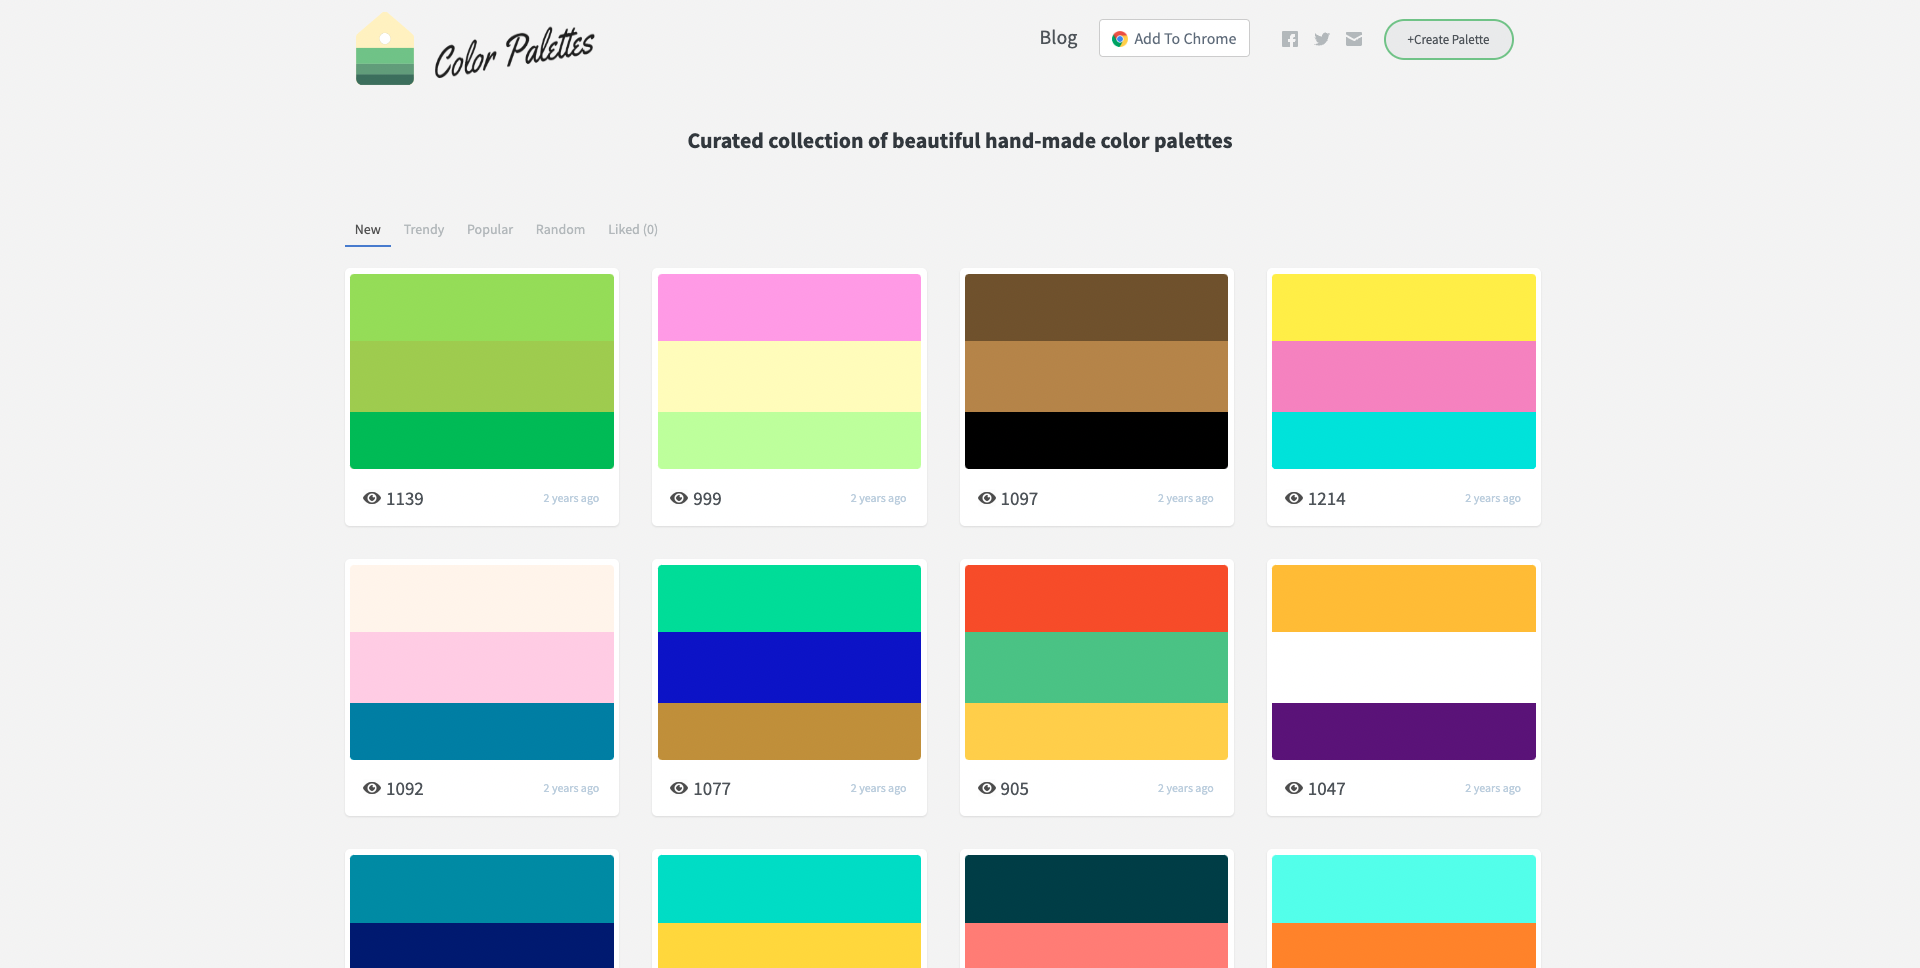 https://colorpalettes.com/new